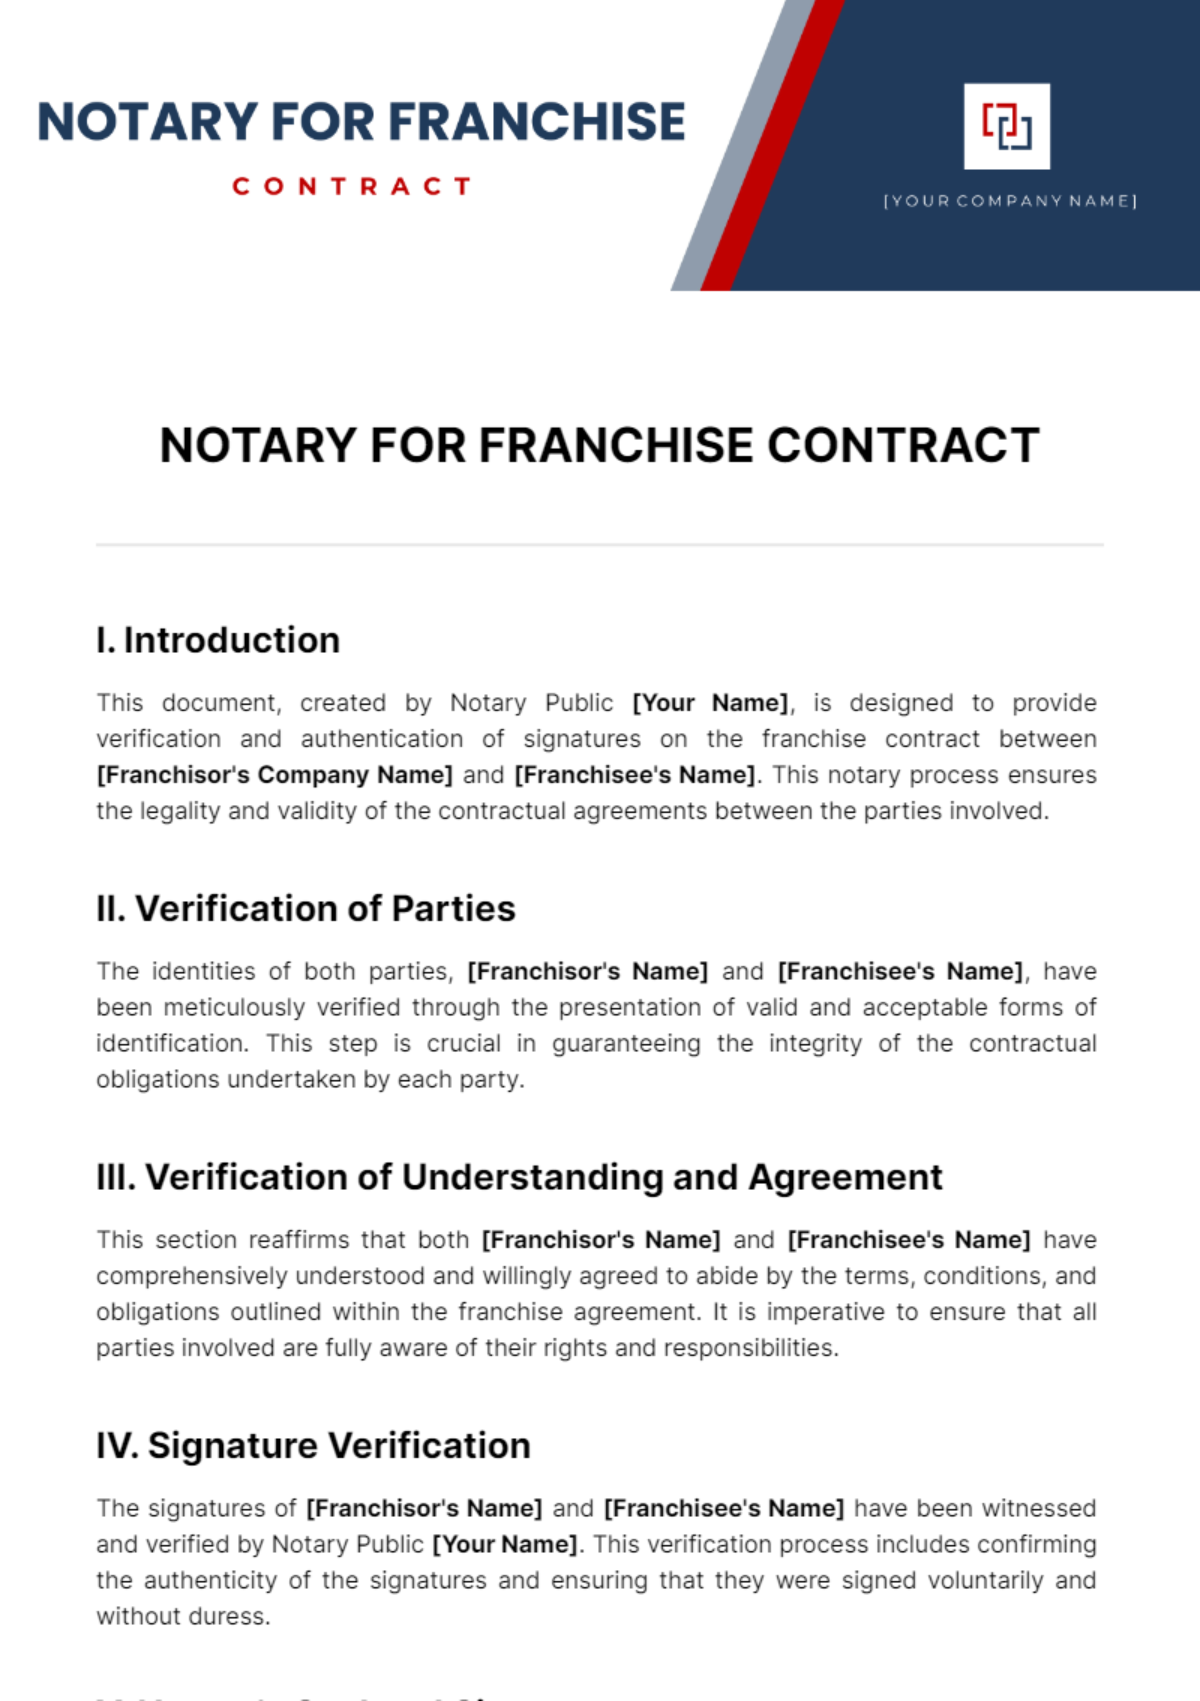 Notary for Franchise Contract Template